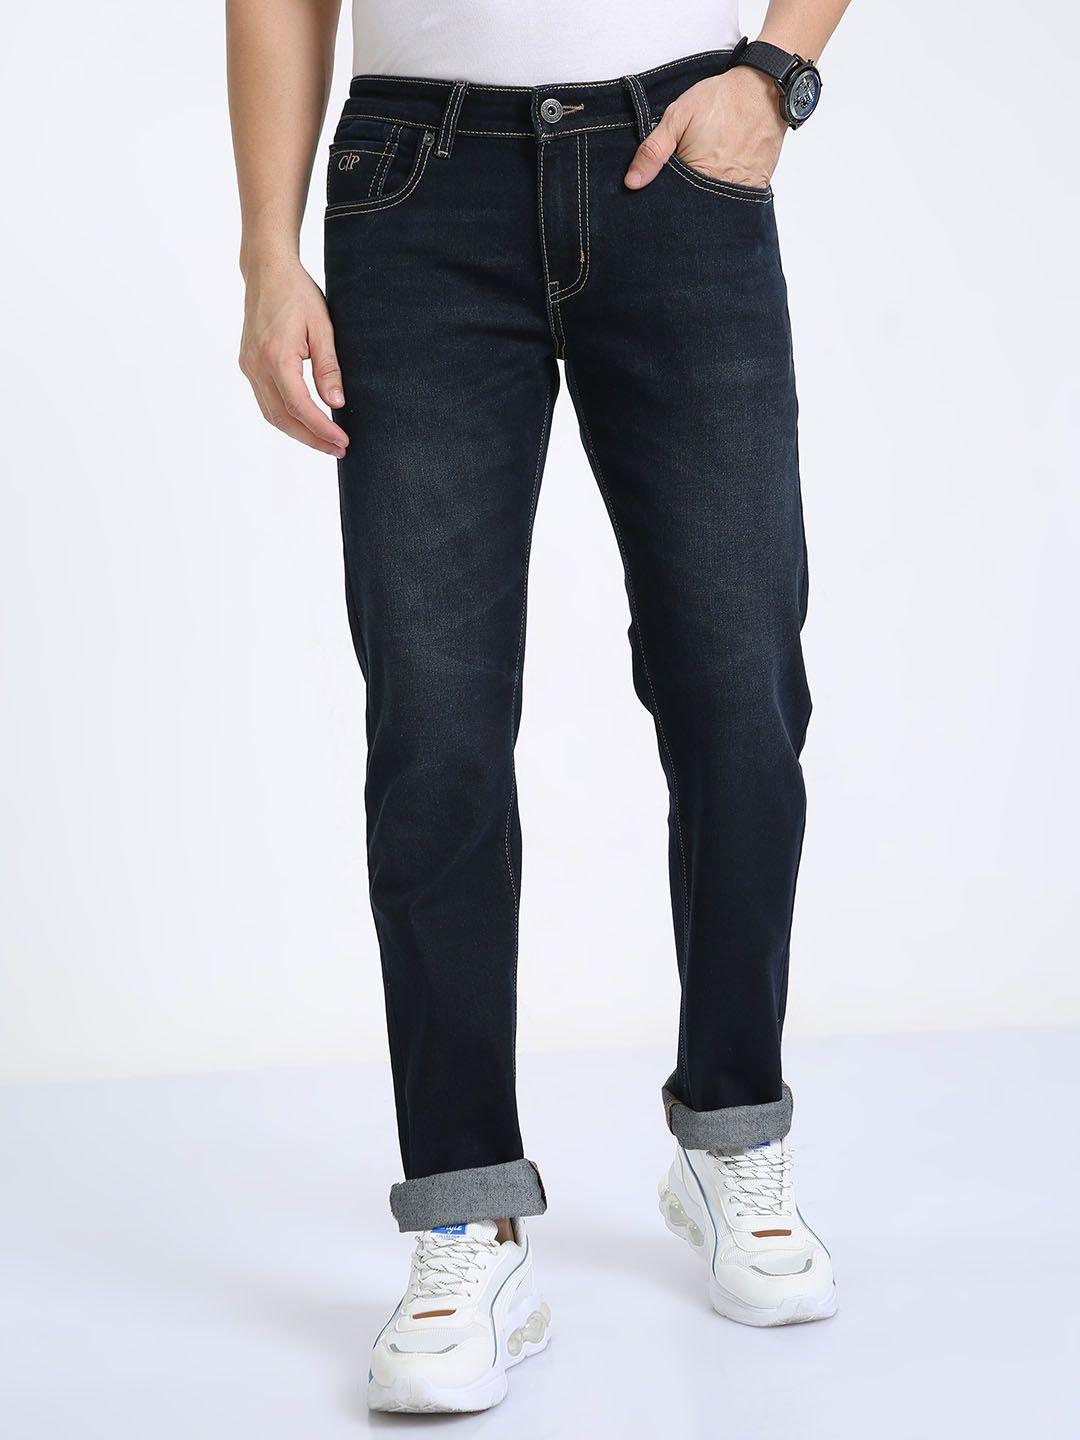 classic polo jean slim fit light fade clean look stretchable jeans